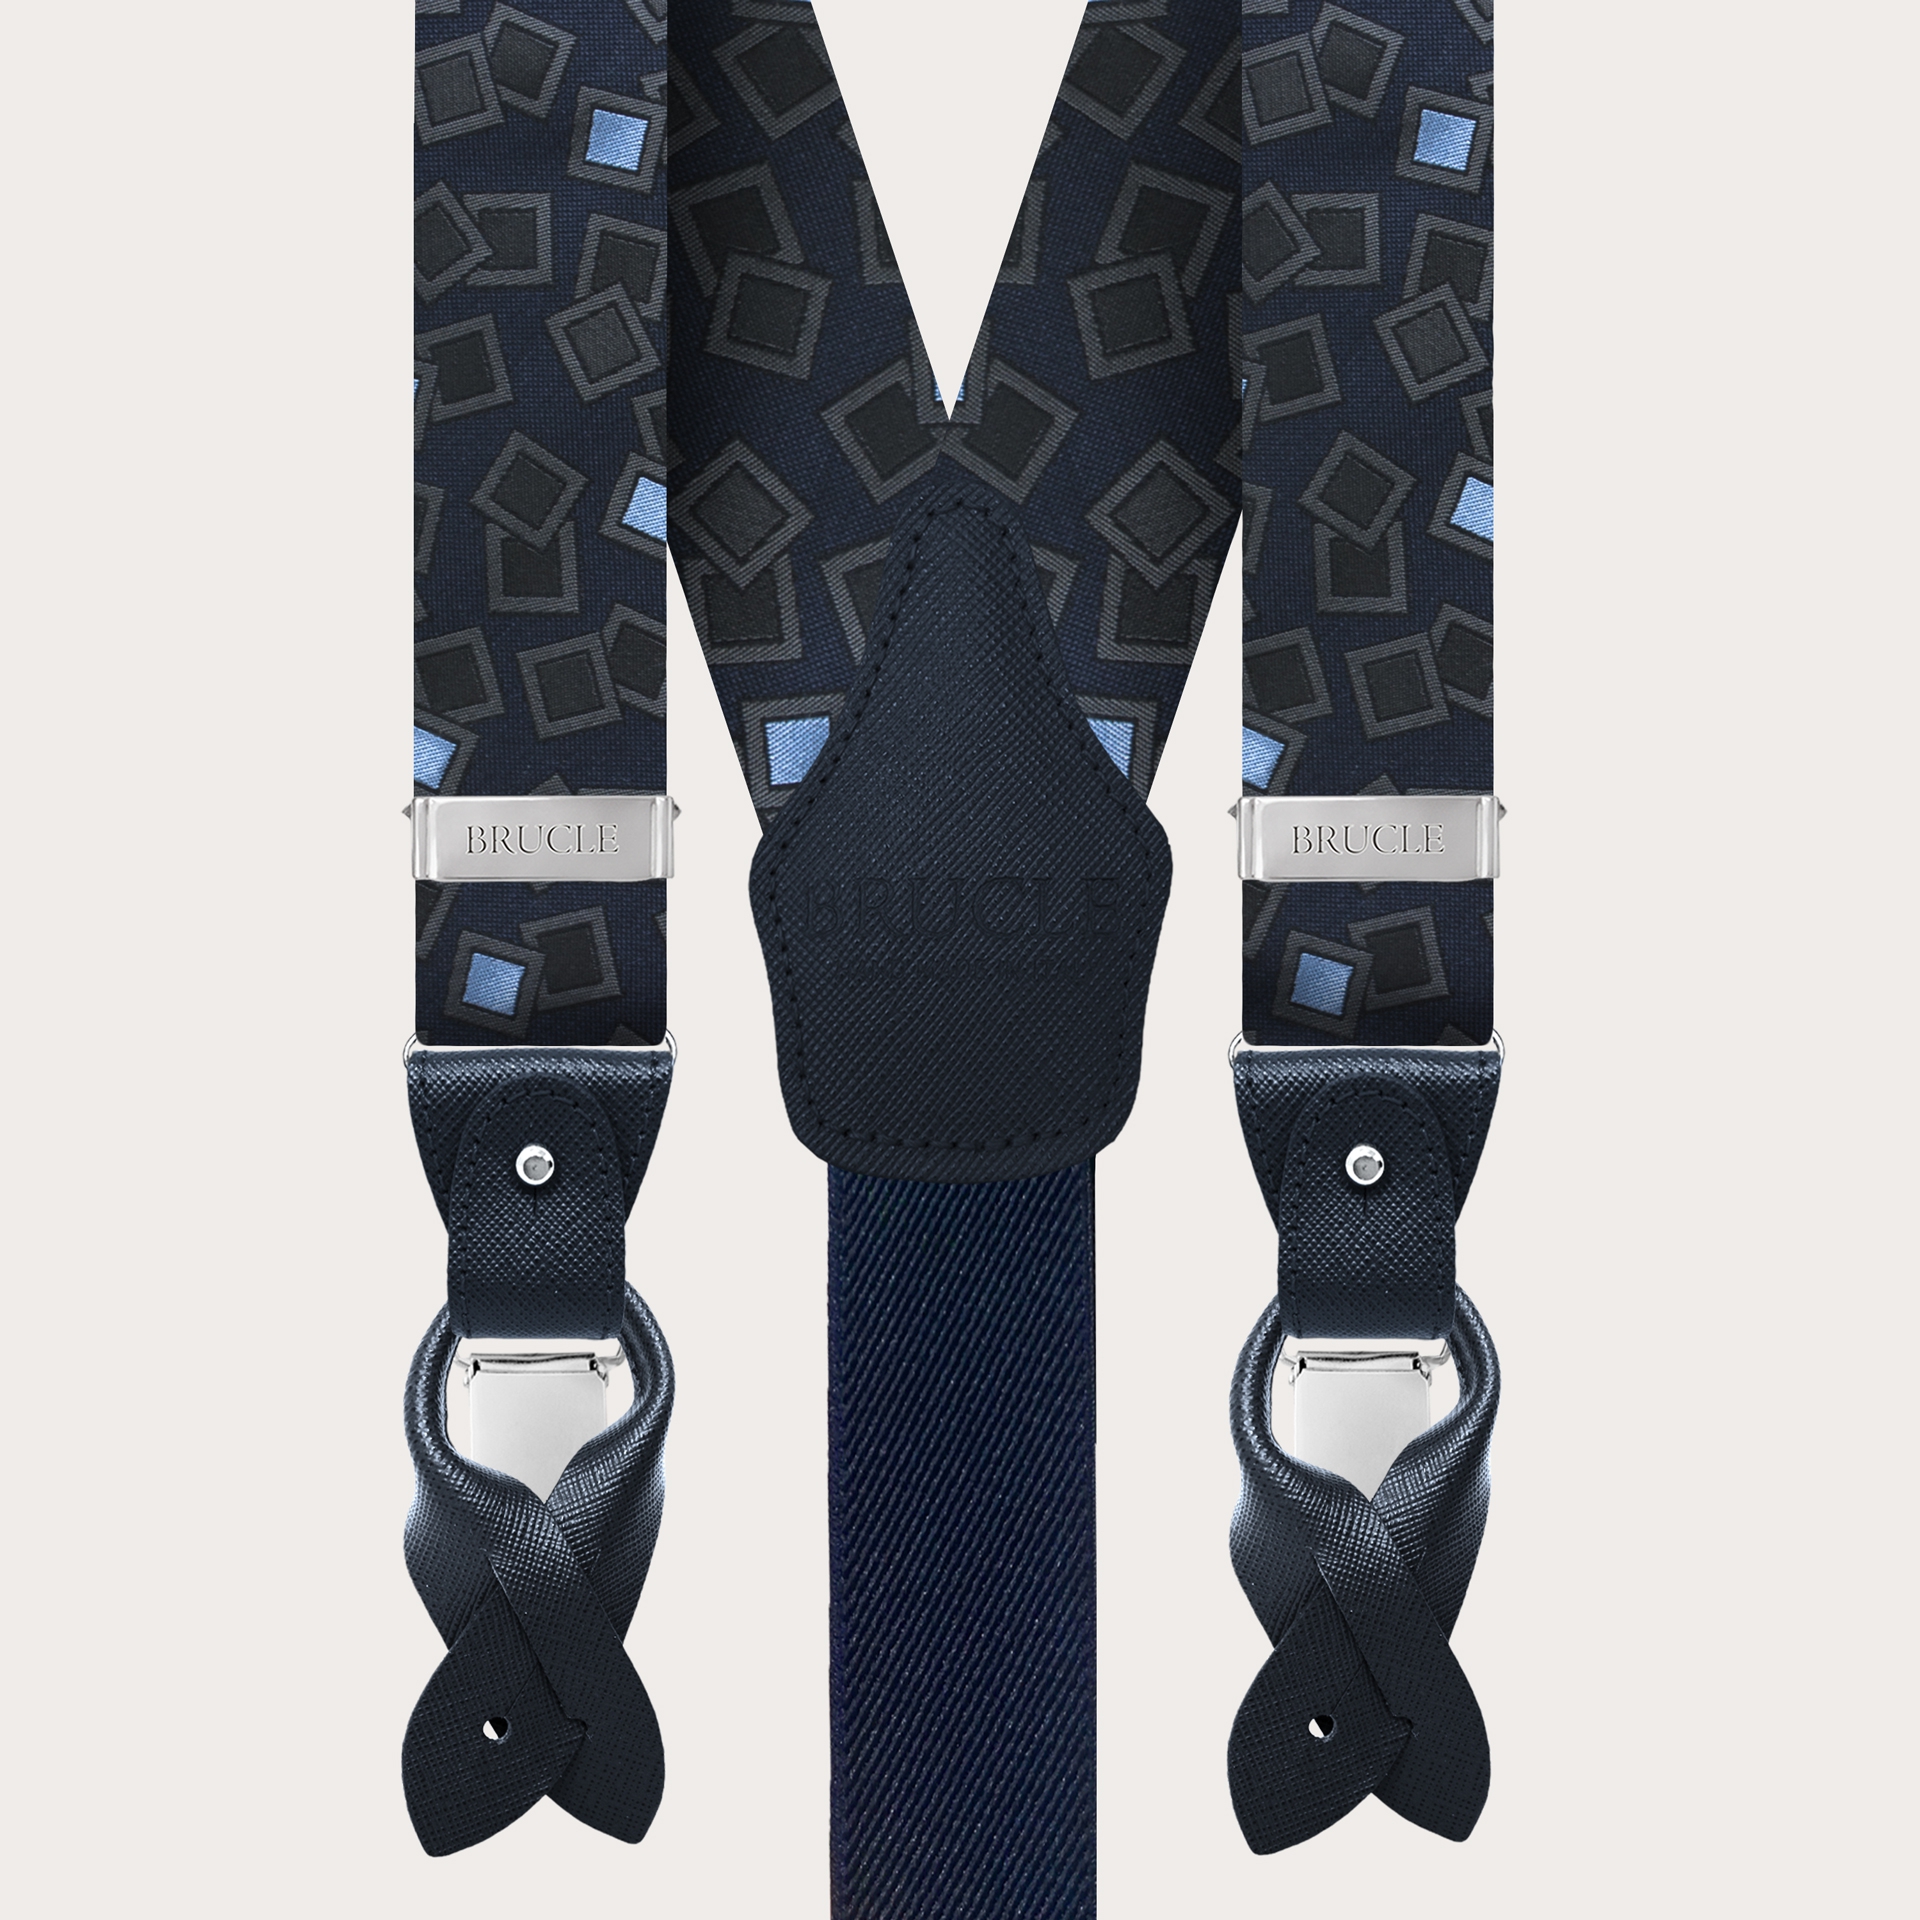 BRUCLE Suspenders in jacquard silk, navy blue with anthracite and light blue pattern